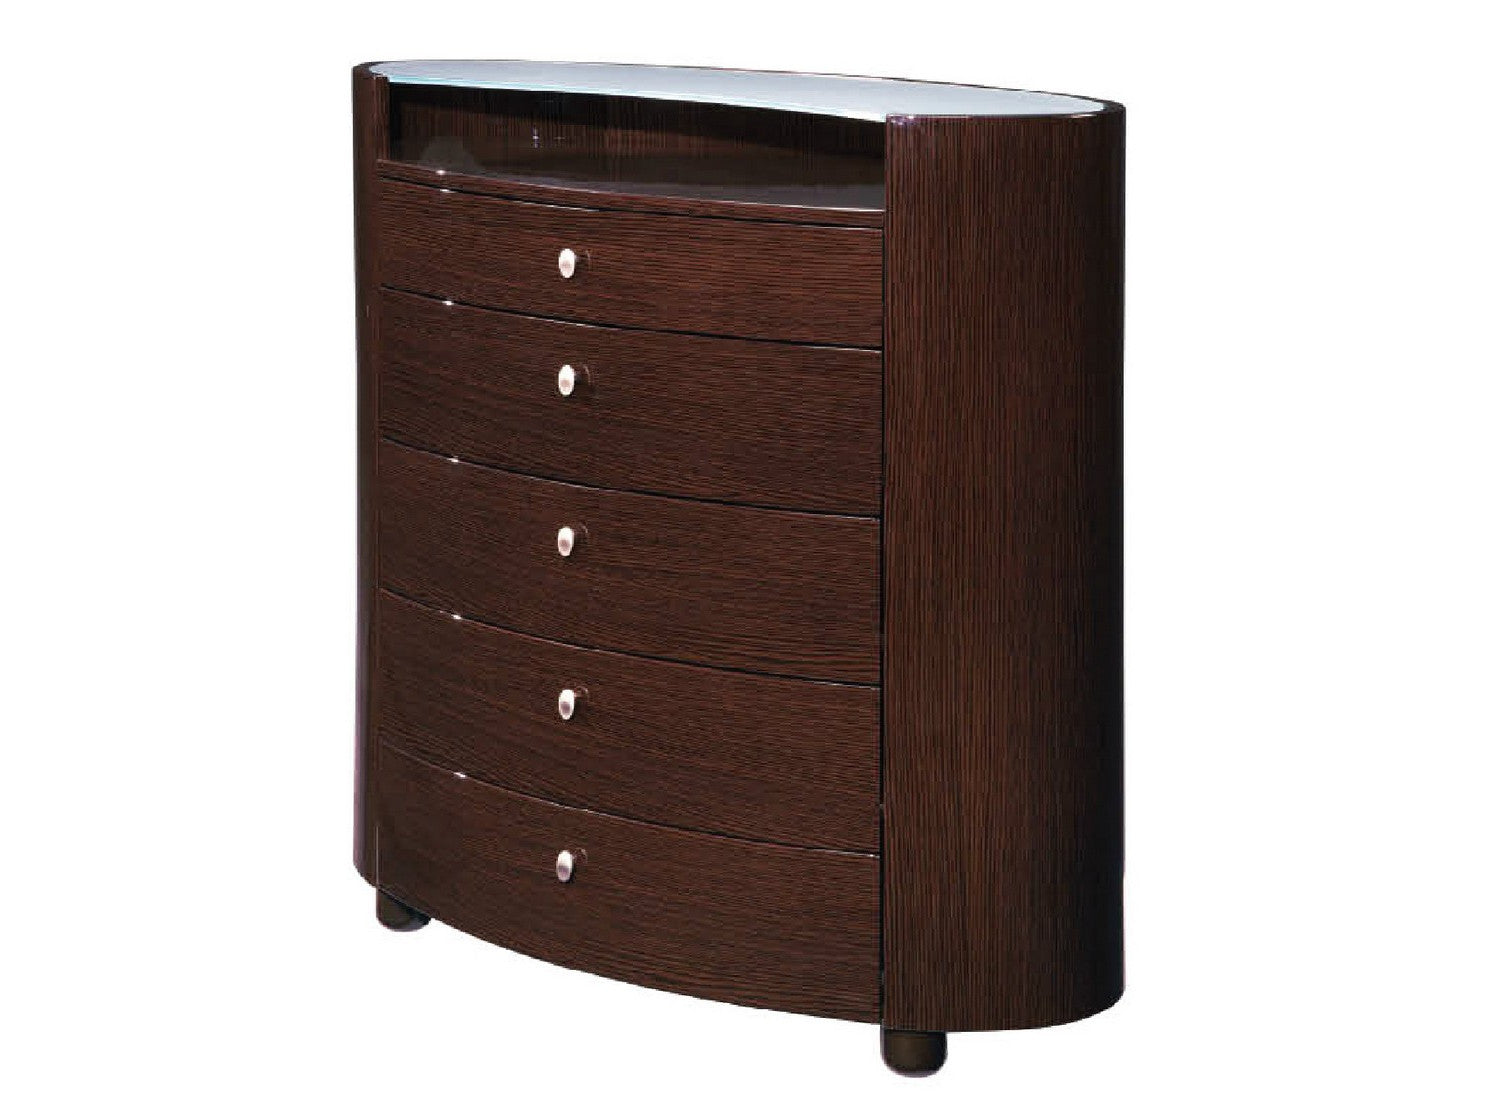 39" Solid Manufactured Wood Chest